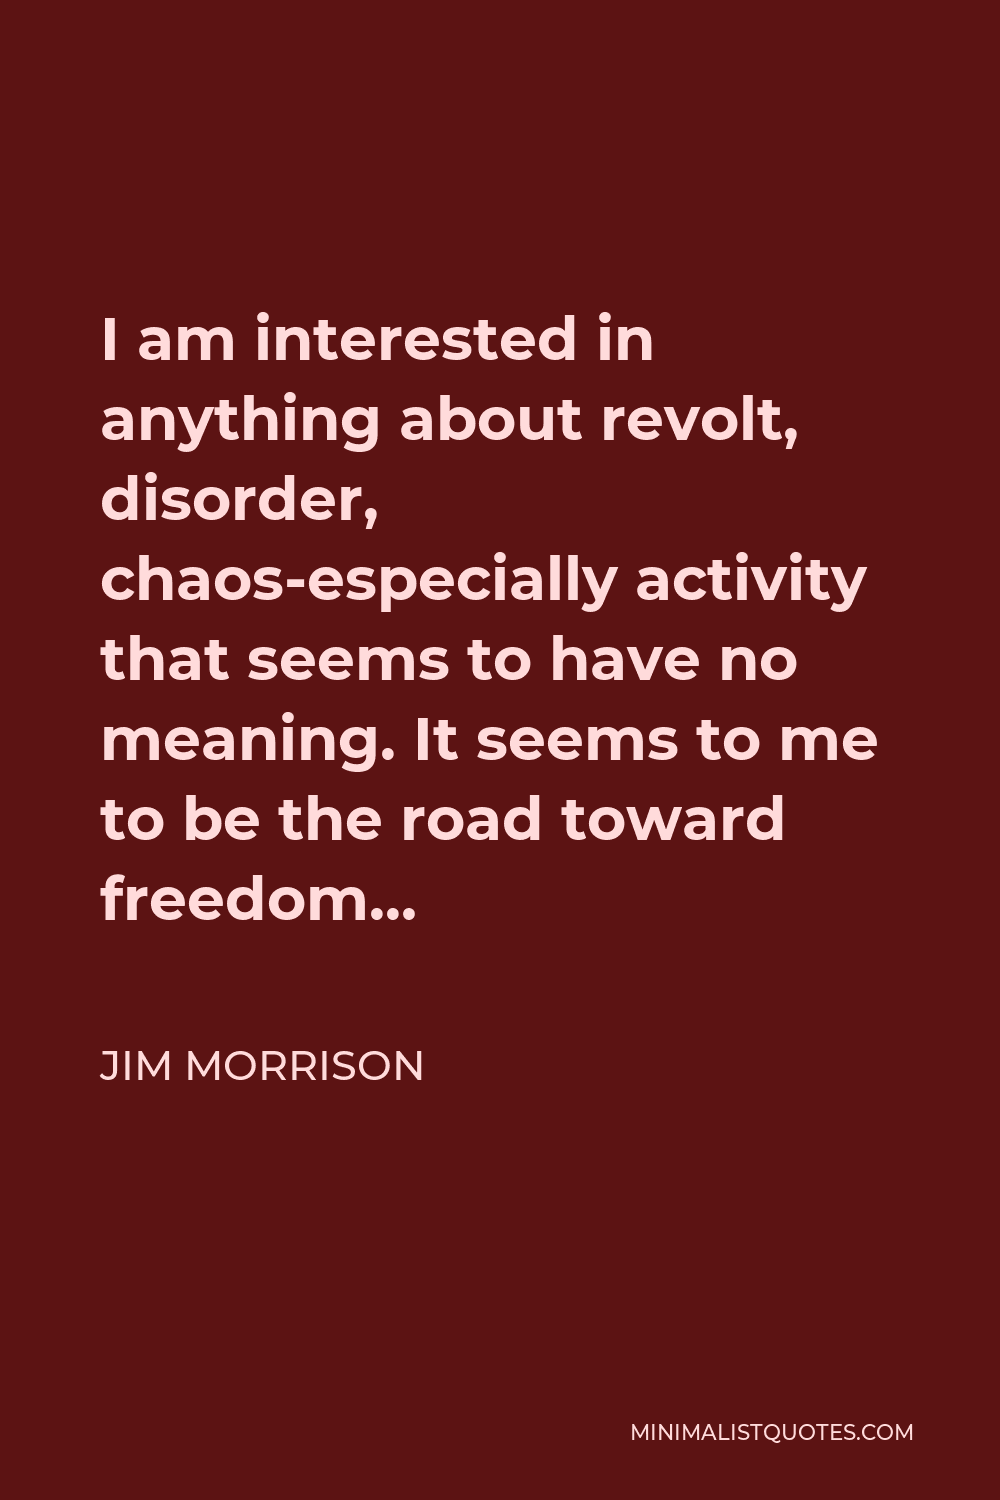 Jim Morrison Quote - I am interested in anything about revolt, disorder, chaos-especially activity that seems to have no meaning. It seems to me to be the road toward freedom…